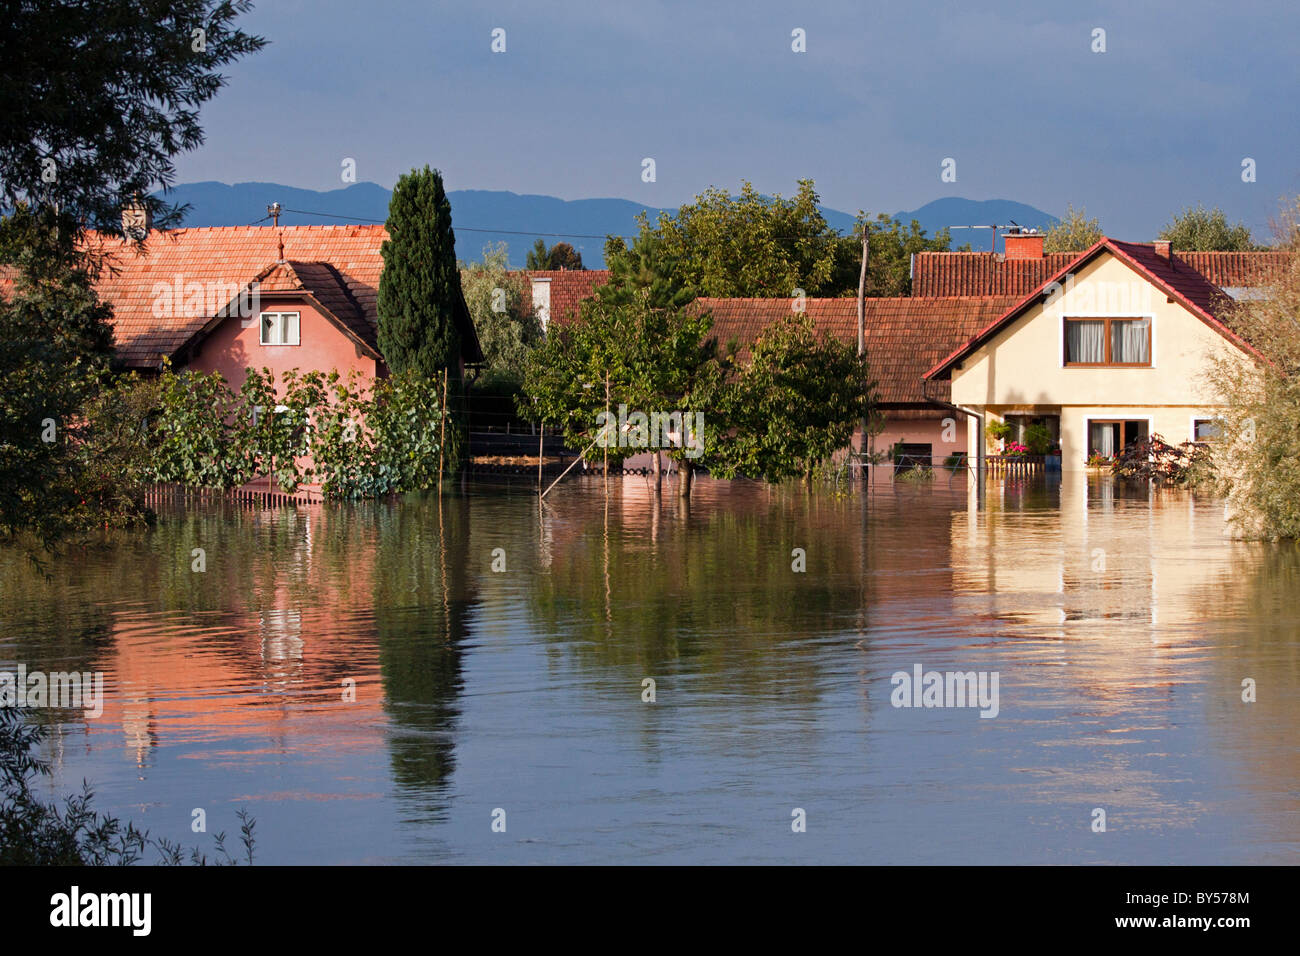 Flooding waters of river Sava and Krka in Slovenia, September 2010 Stock Photo